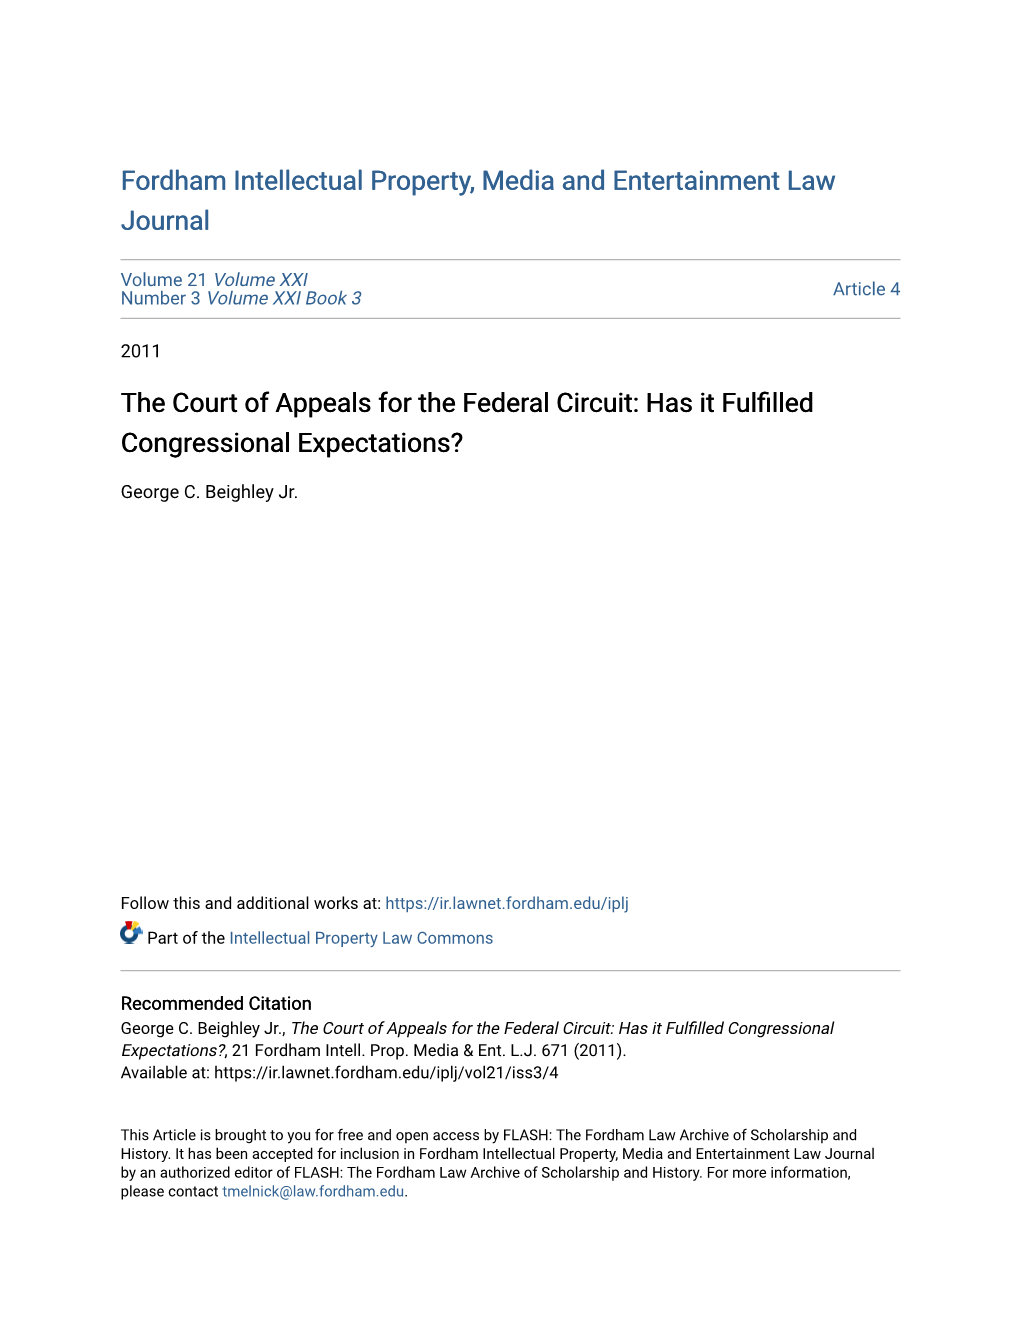 The Court of Appeals for the Federal Circuit: Has It Fulfilled Congressional Expectations?